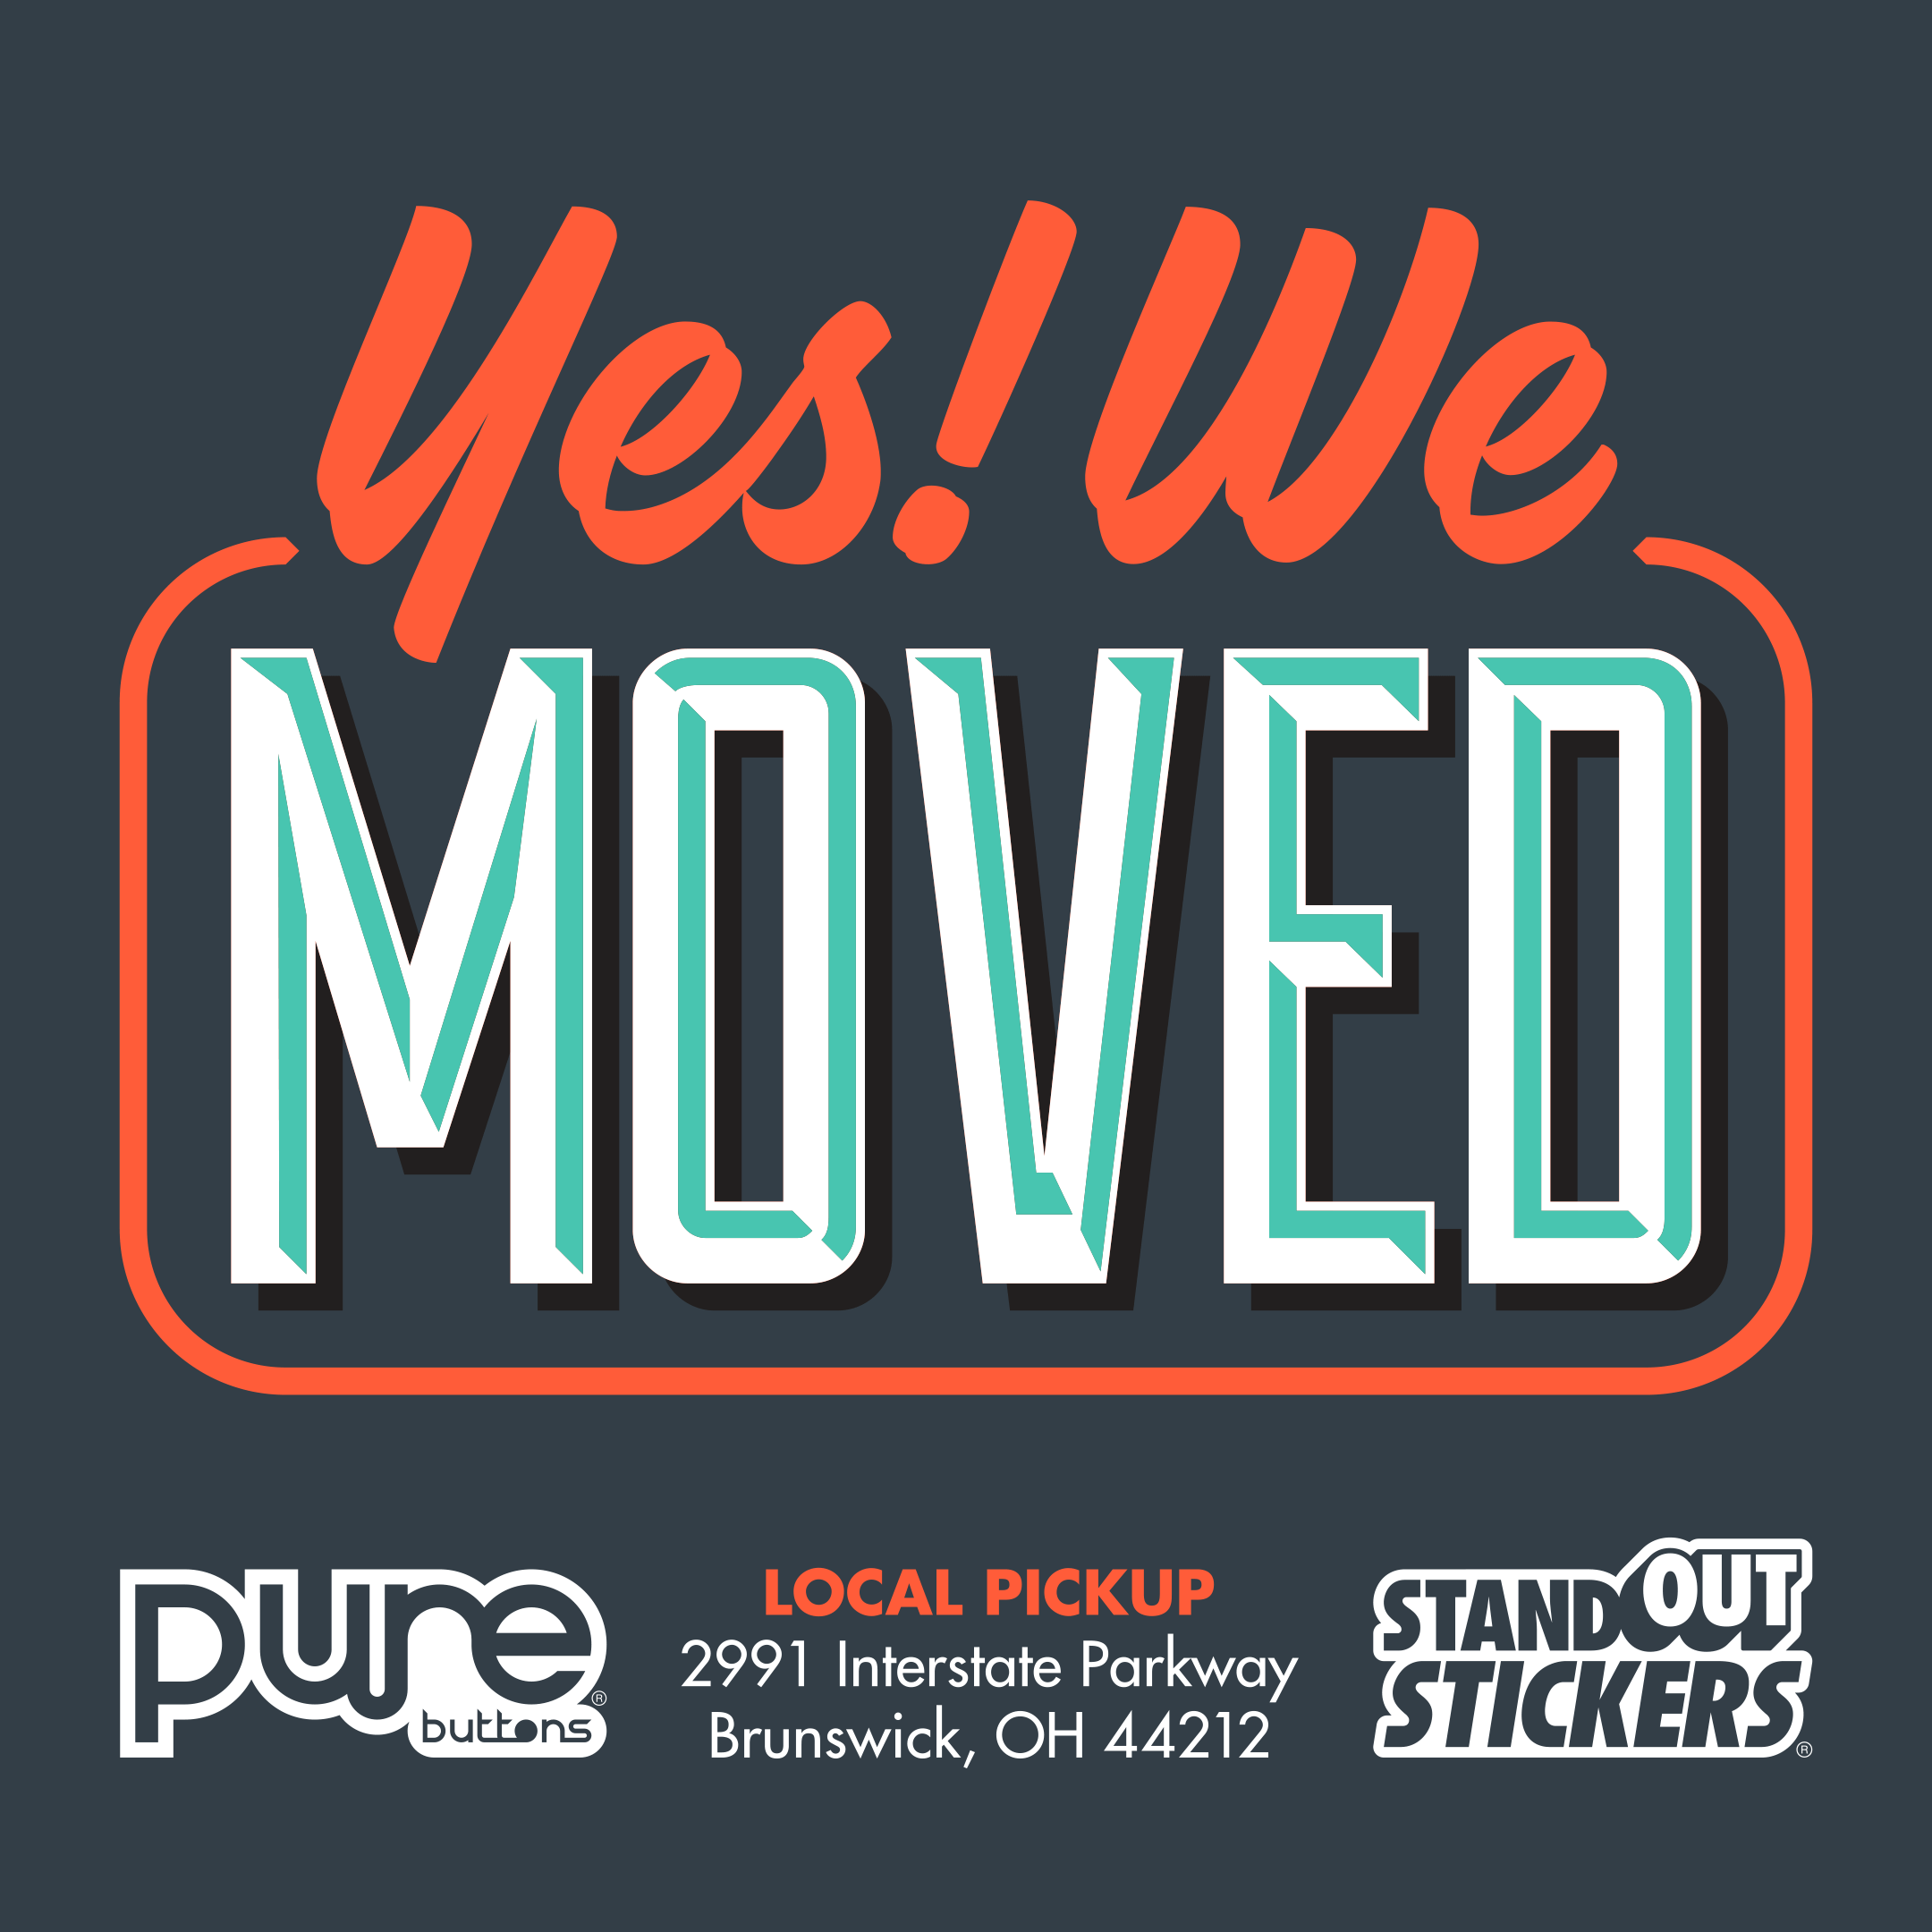 StandOut Stickers has moved to Brunswick, OH